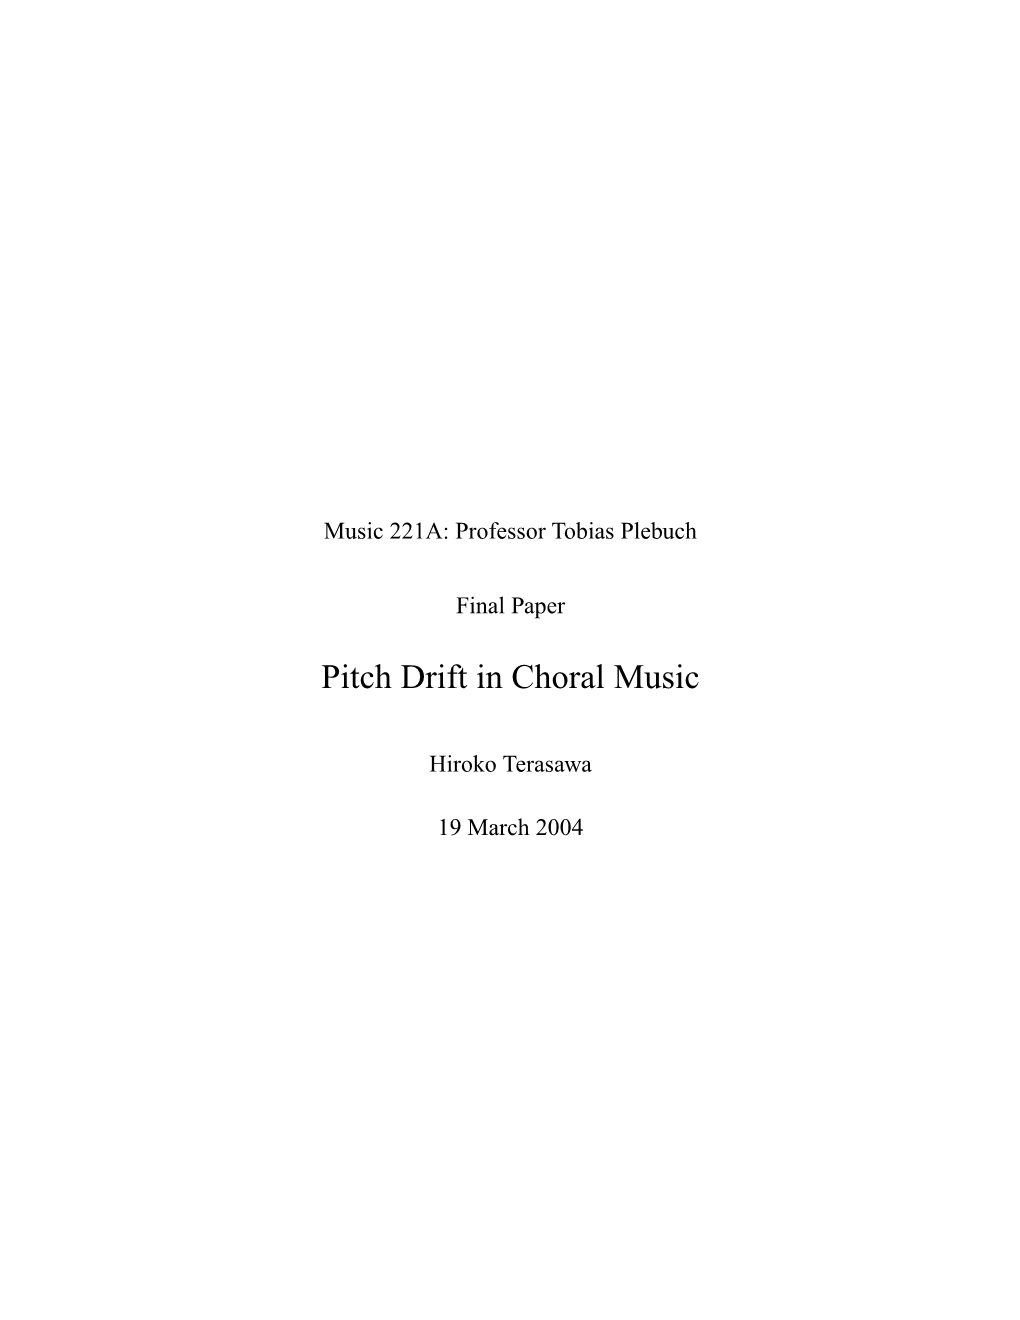 Pitch Drift in Choral Music